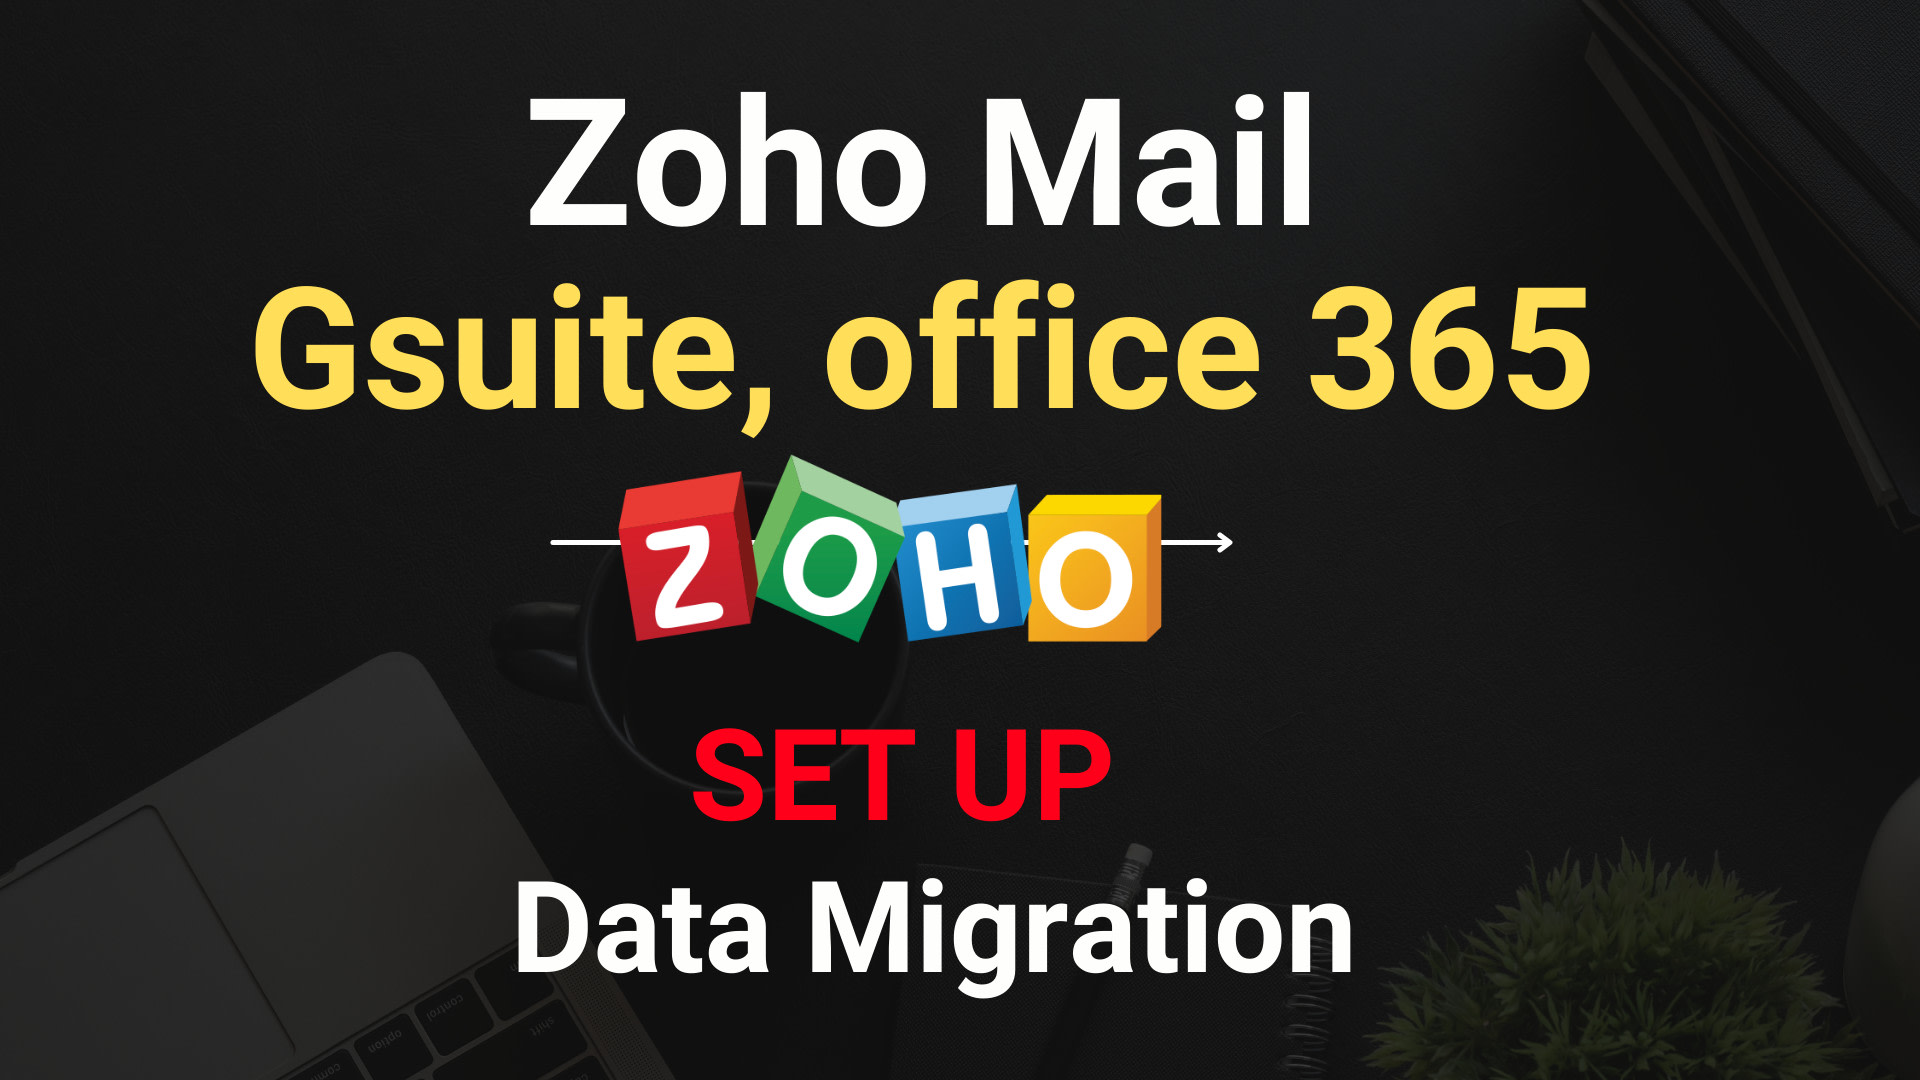 Set up zoho mail gsuite, microsoft 365 with your domain by Kaderipe007 |  Fiverr